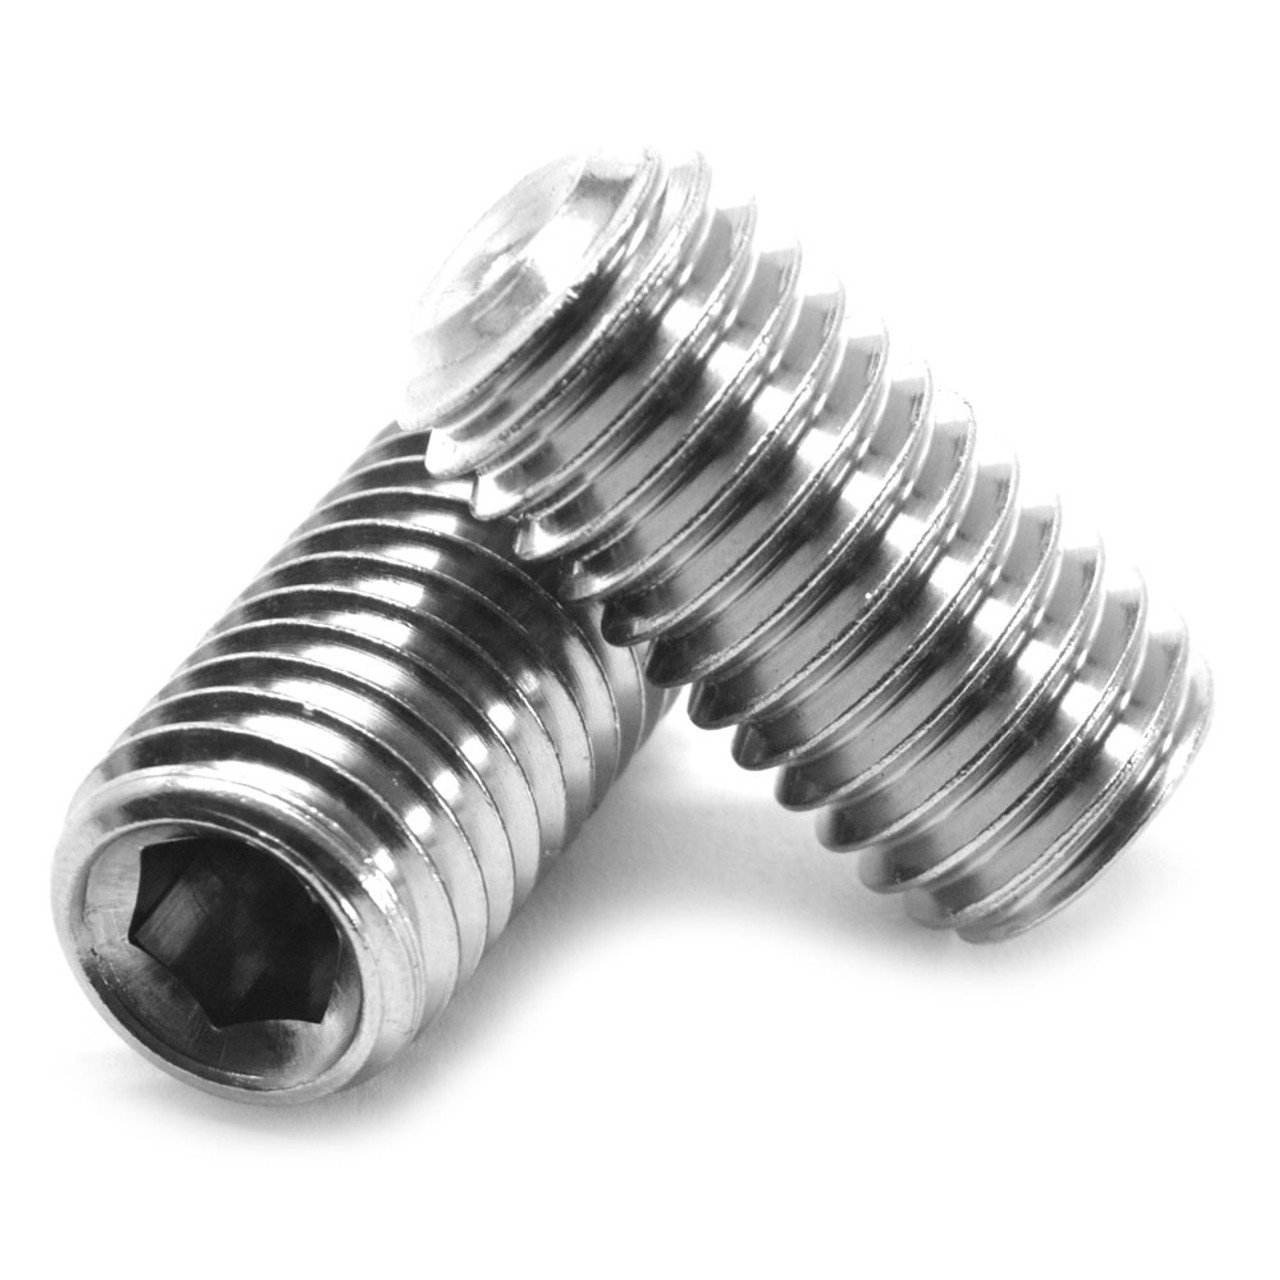 #5-40 x 1/4" Coarse Thread Socket Set Screw Cup Point Stainless Steel 18-8